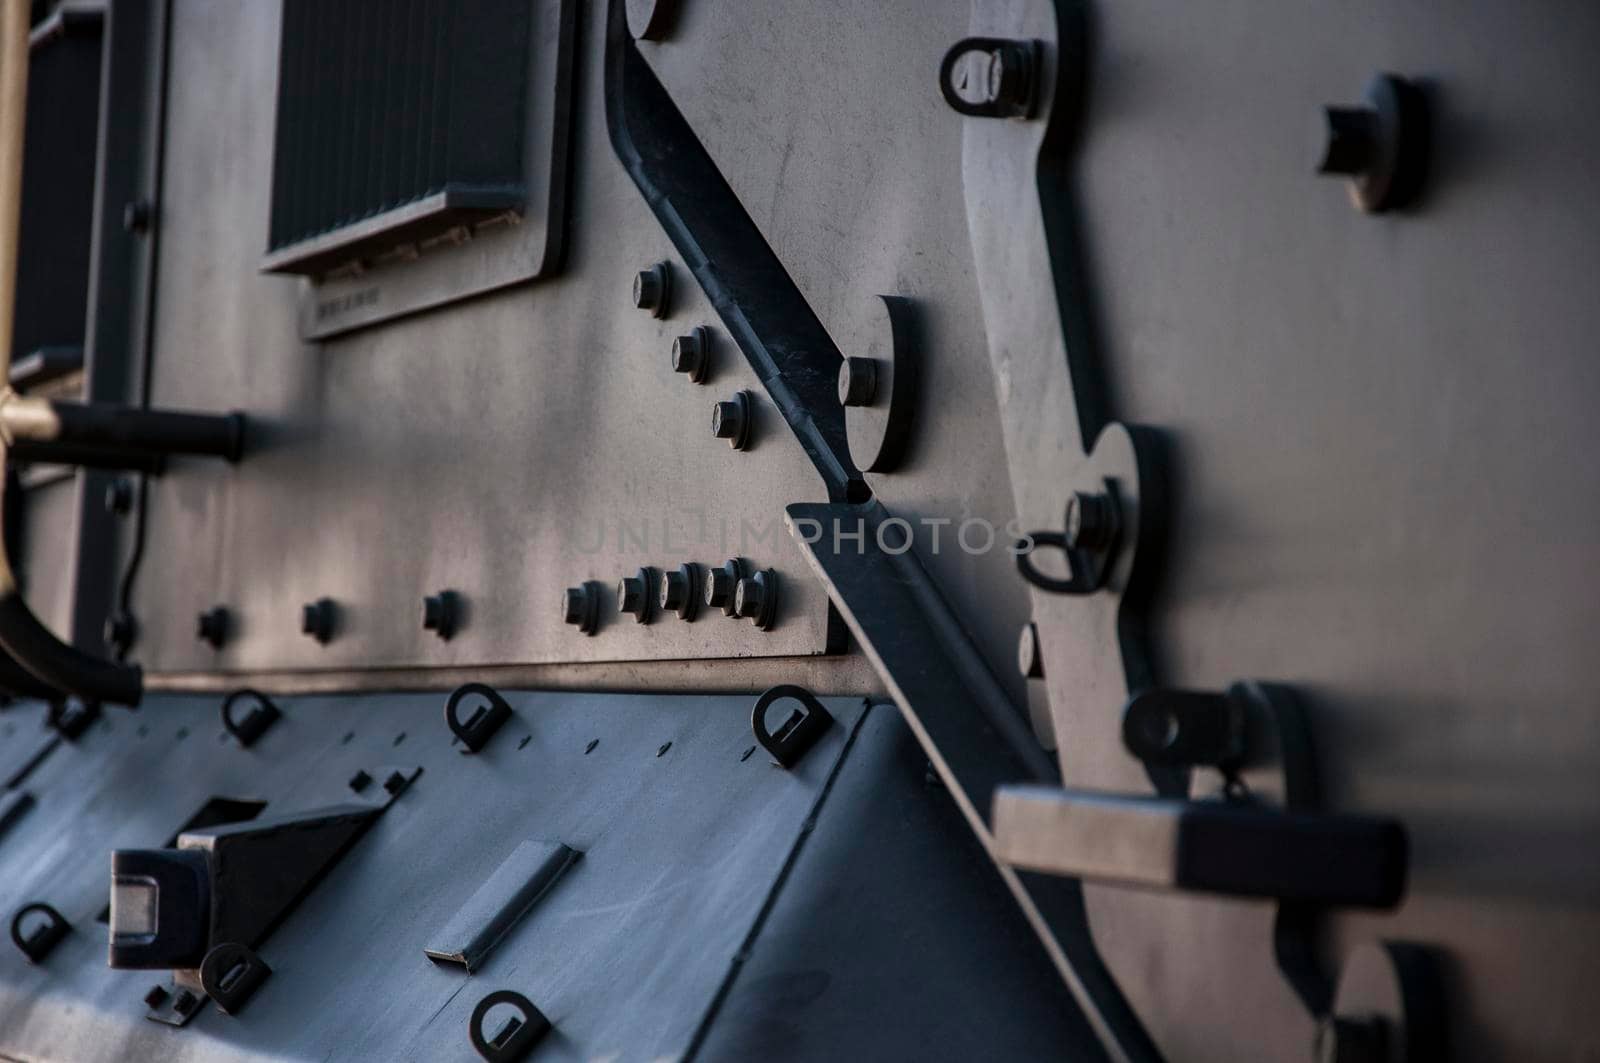 Details artillery gun. Camouflage surface with exfoliated paint and rivets on the armor. Military equipment background. Close-up